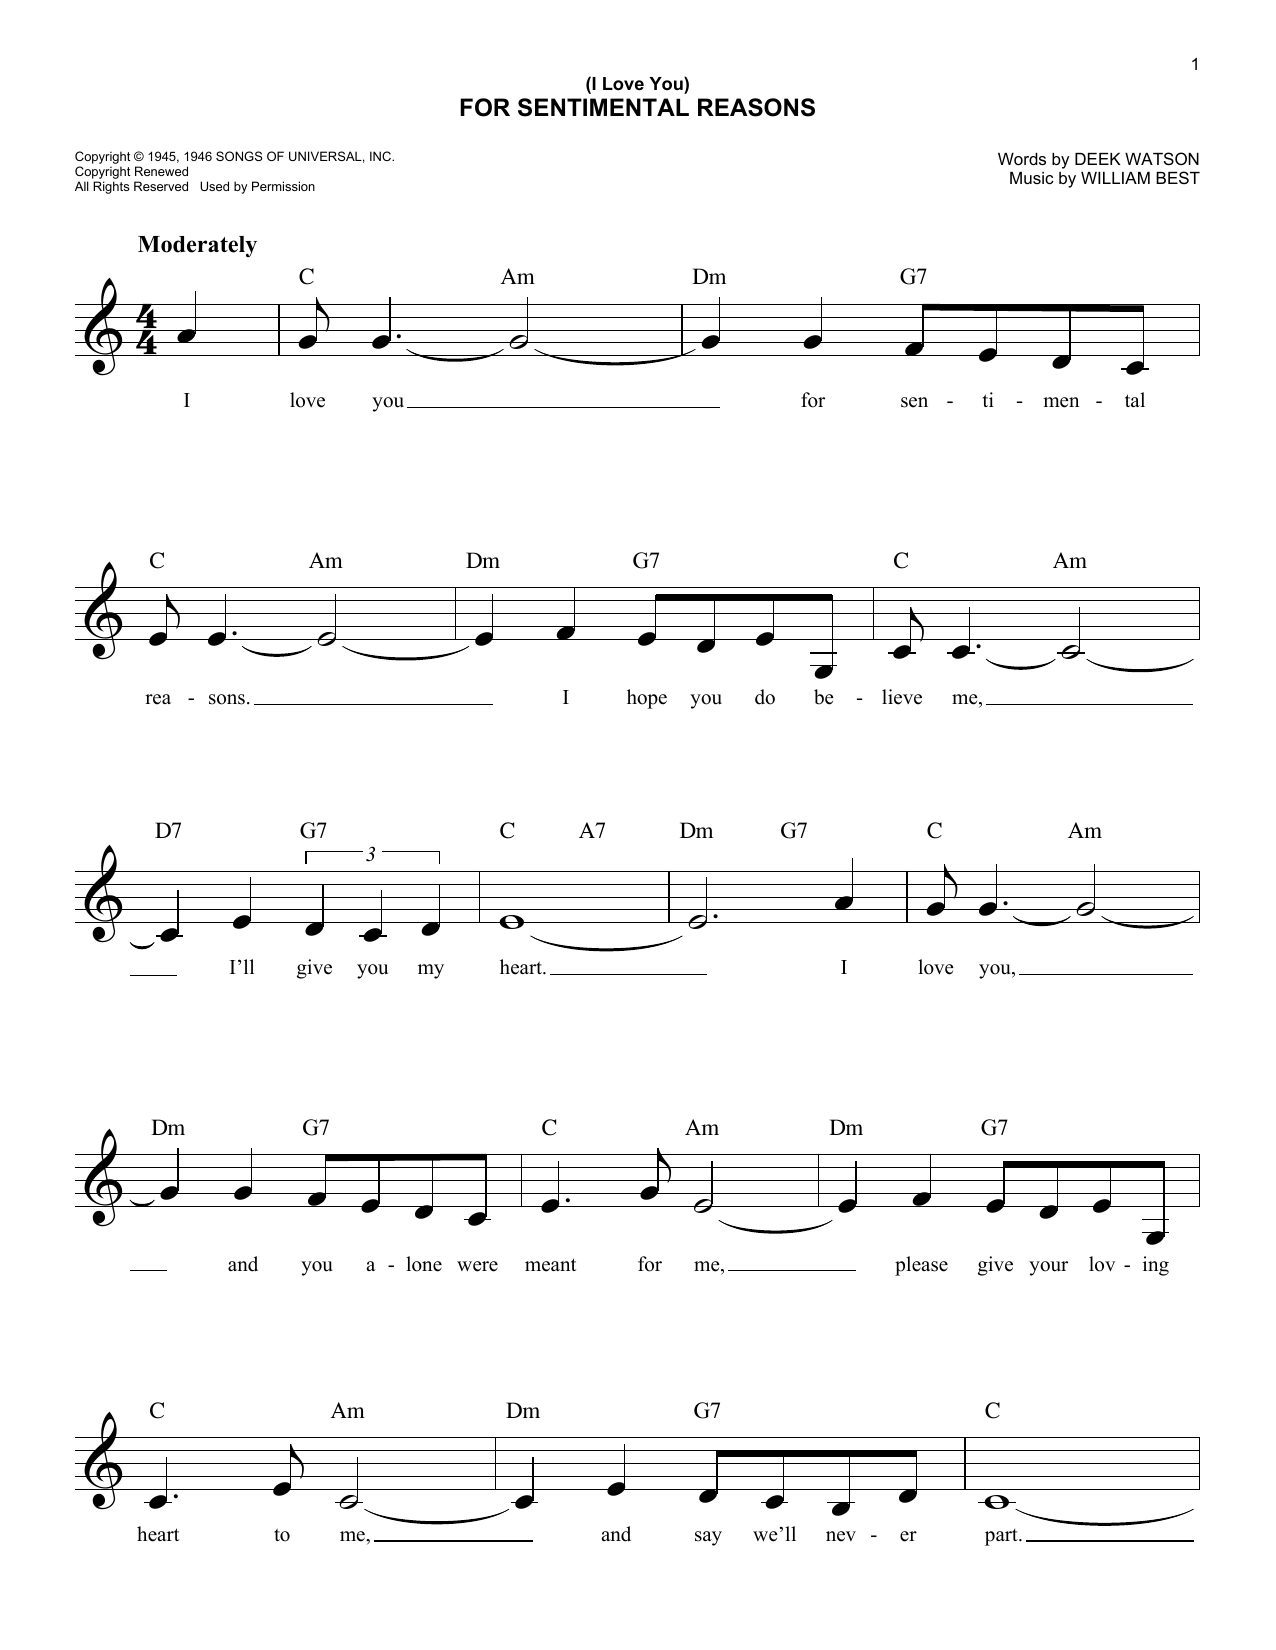 King Cole Trio (I Love You) For Sentimental Reasons sheet music notes printable PDF score